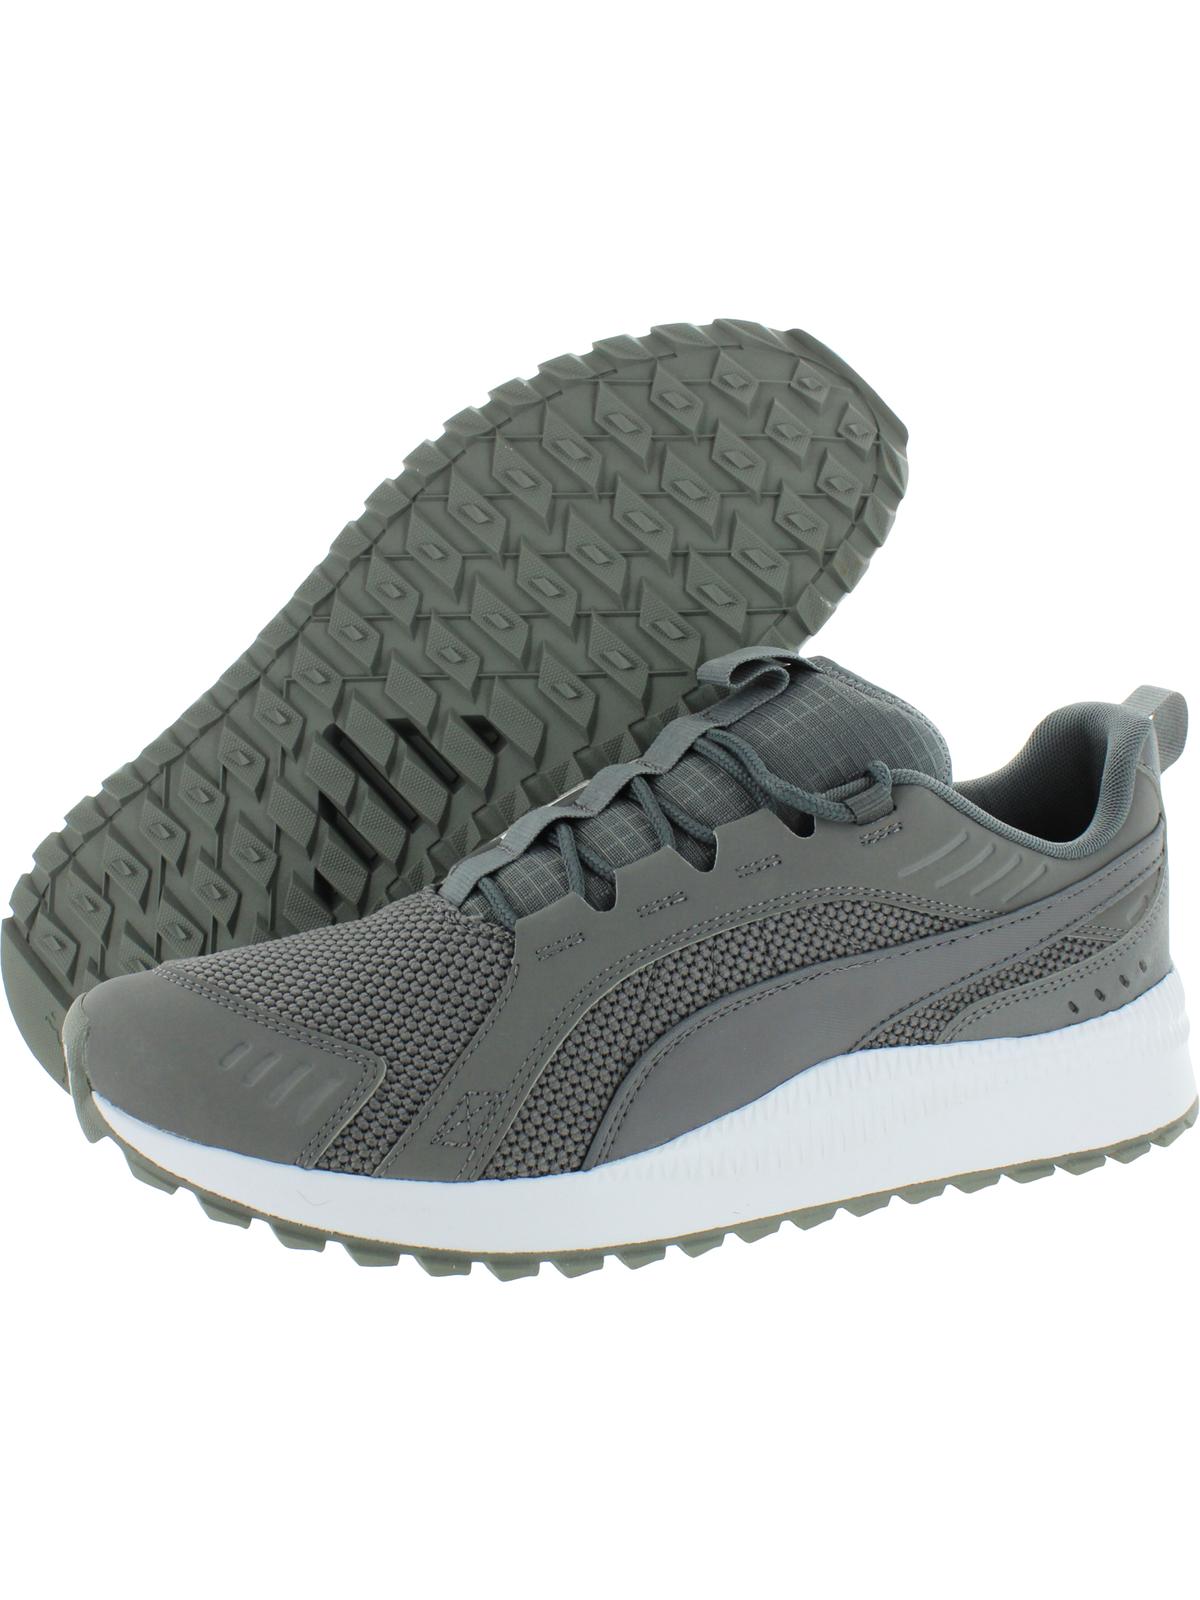 Puma Mens Pacer Next R Fitness Workout Athletic Shoes Gray 13 Medium (D) - image 2 of 2